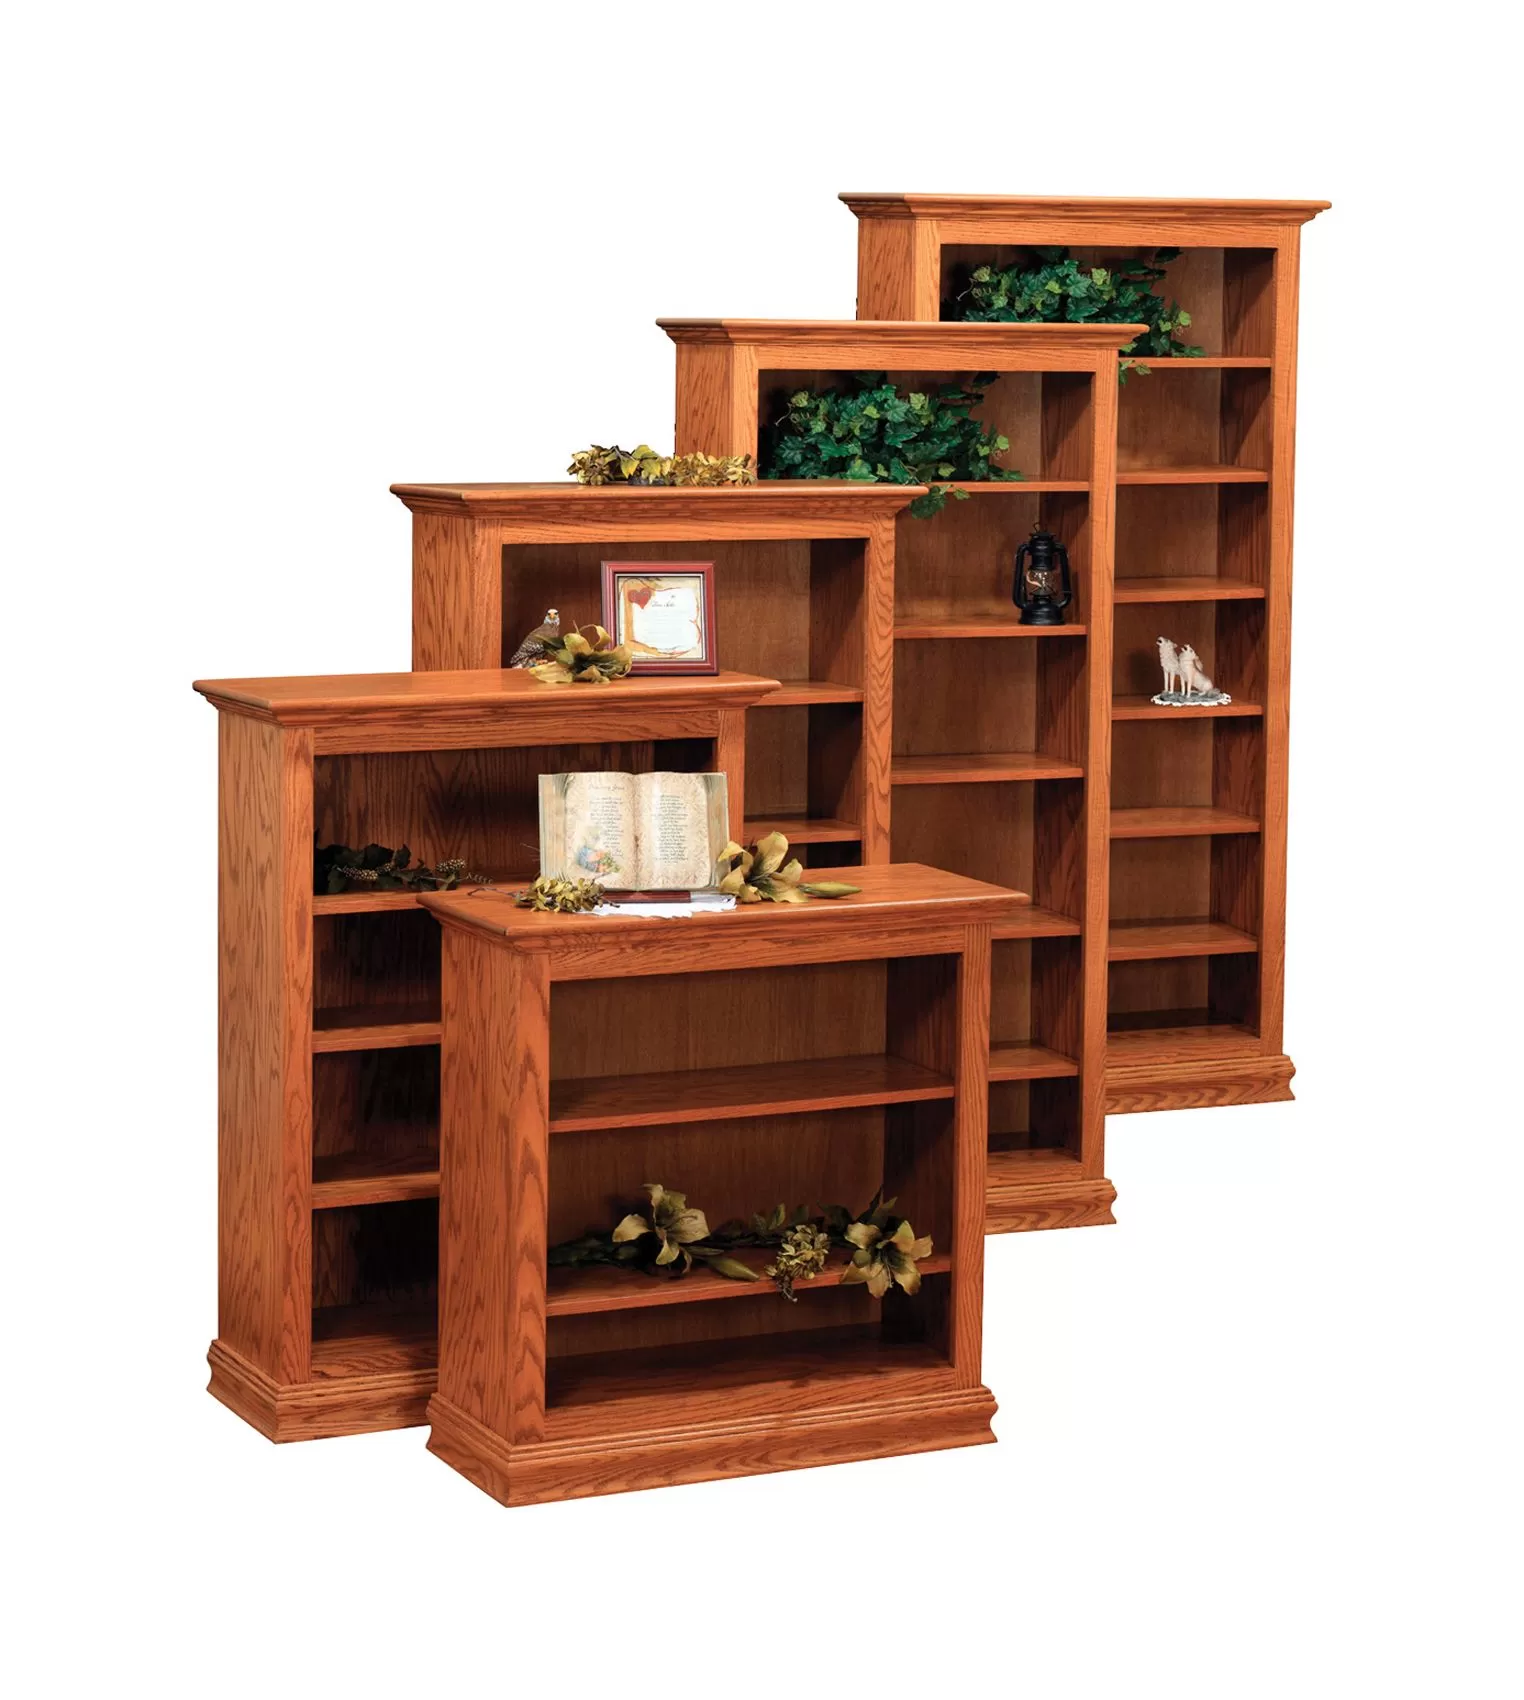 36" Traditional Open Bookcases